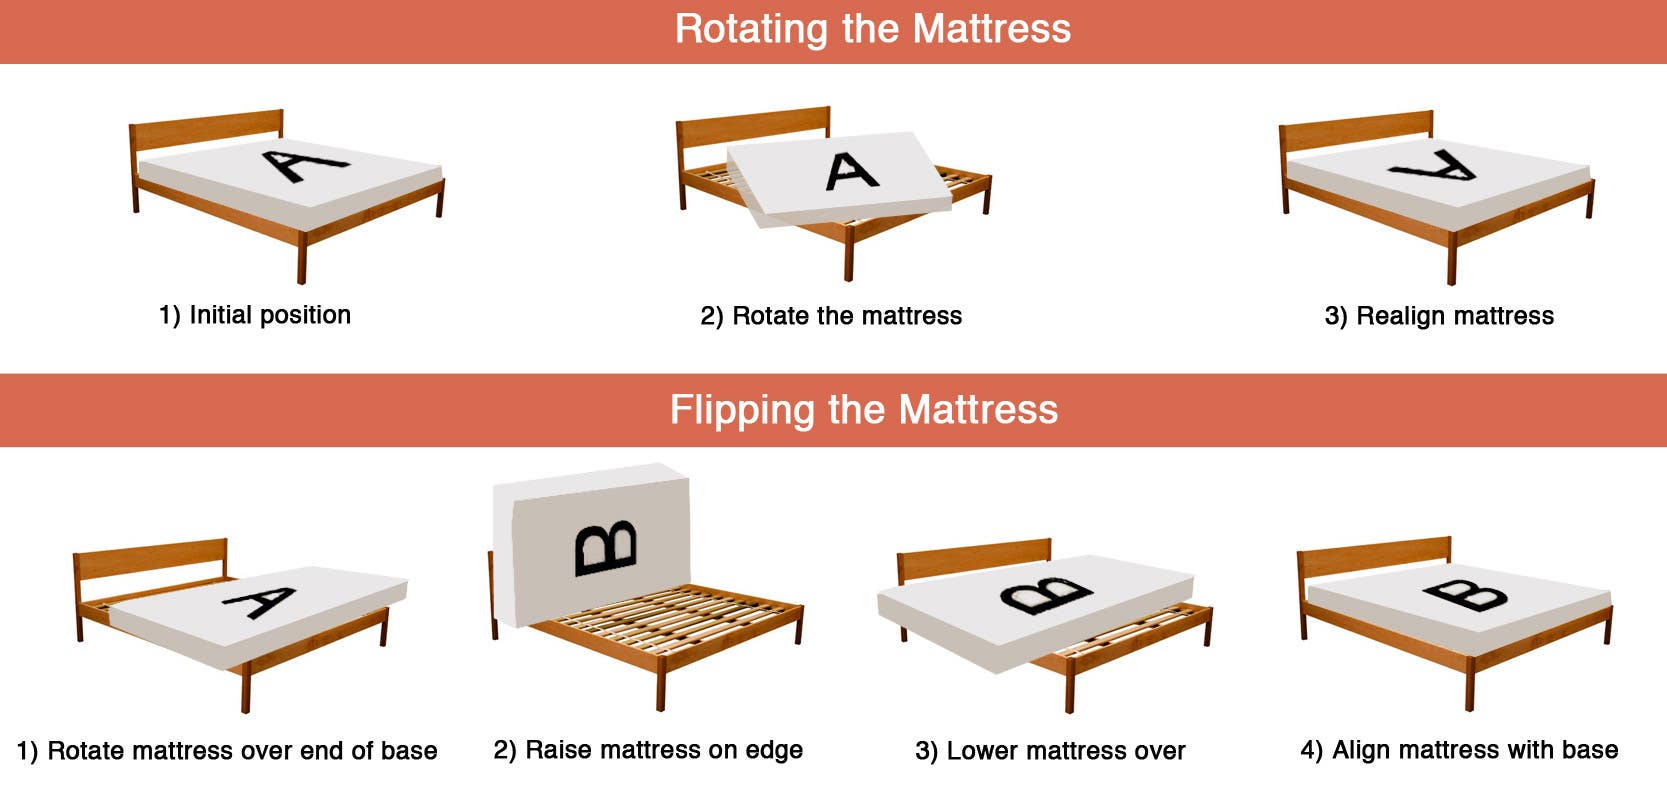 What Does Flipping/Rotating A Mattress Do?